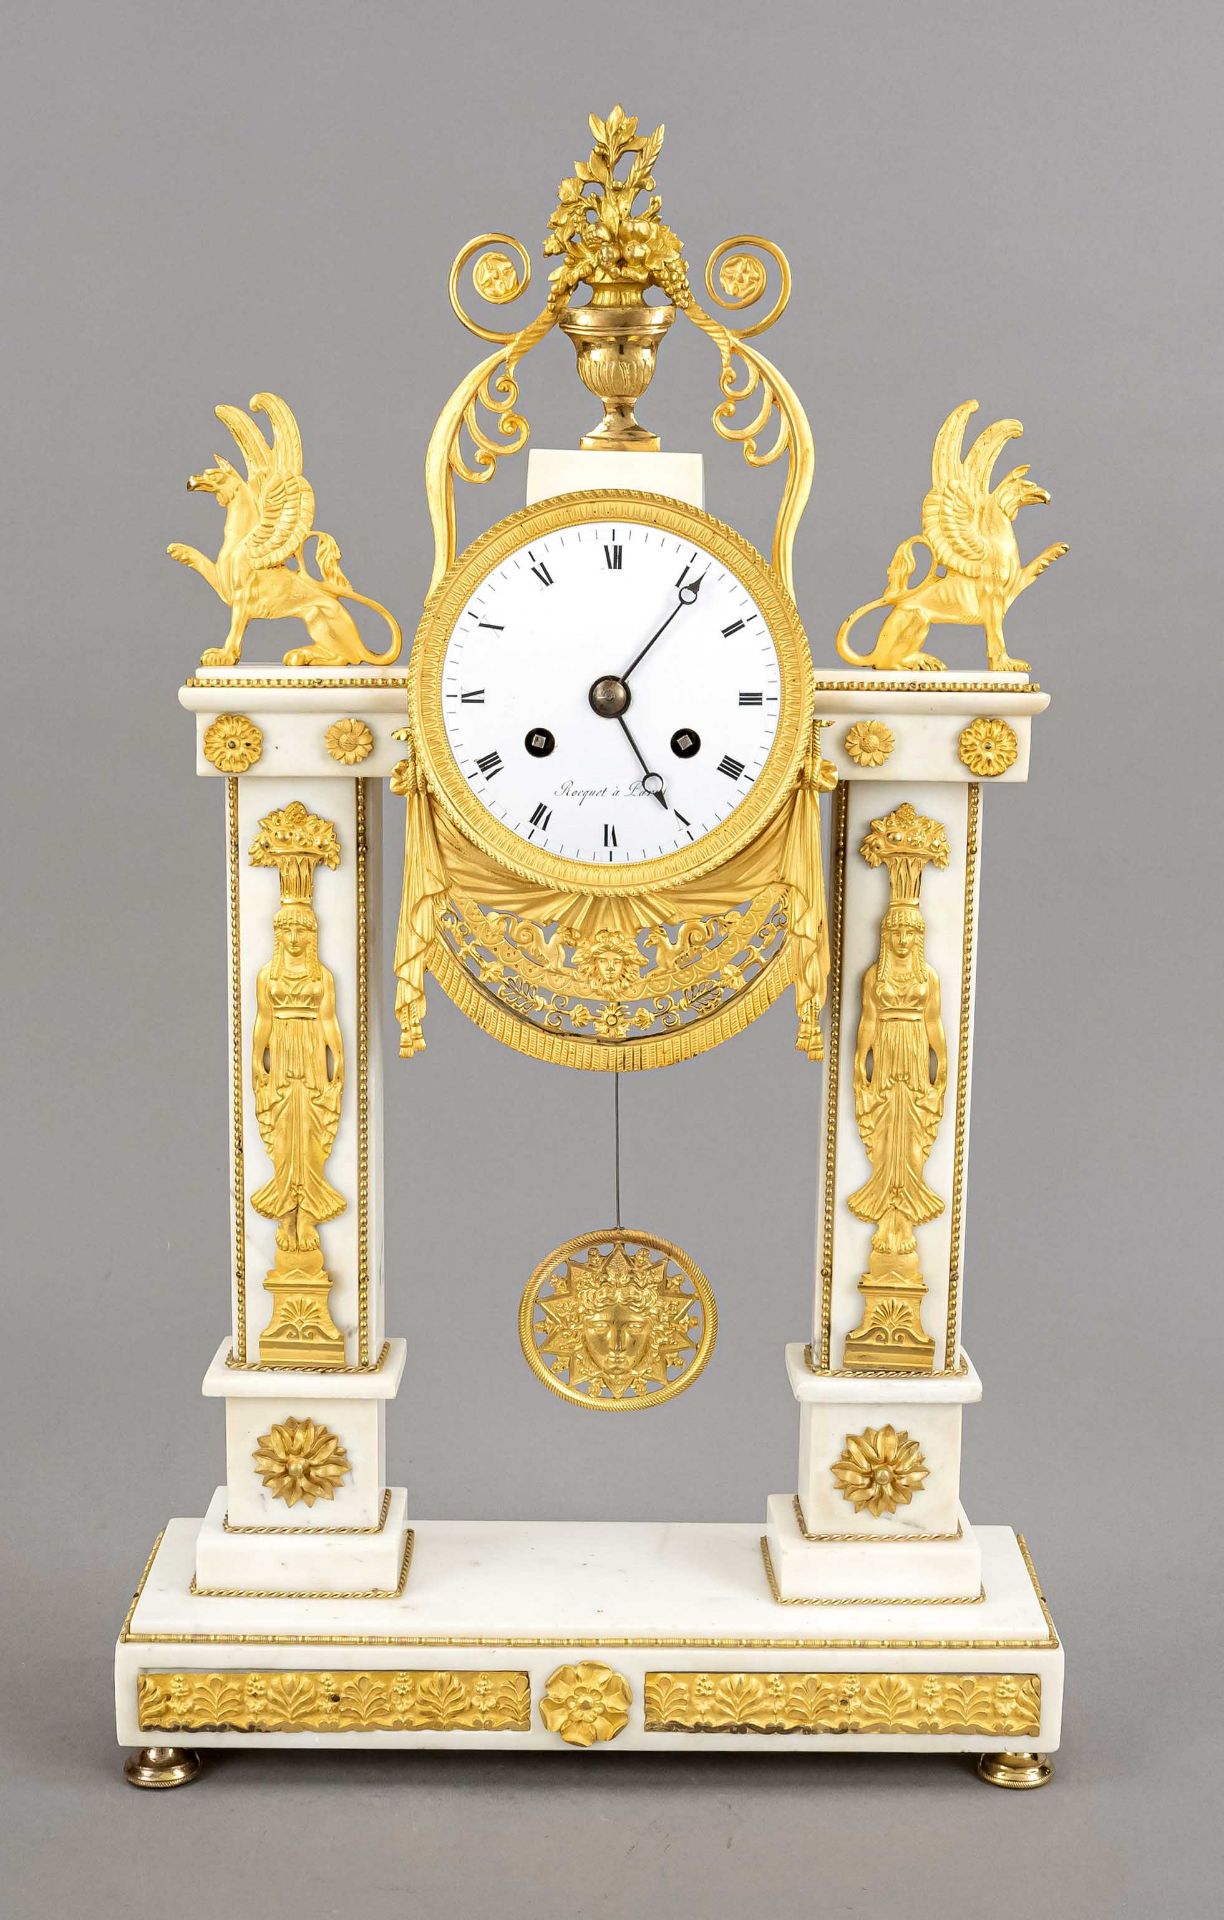 French portal clock with sun pendulum, 1st h. 19th c., white marble, rich fire gilded bronze